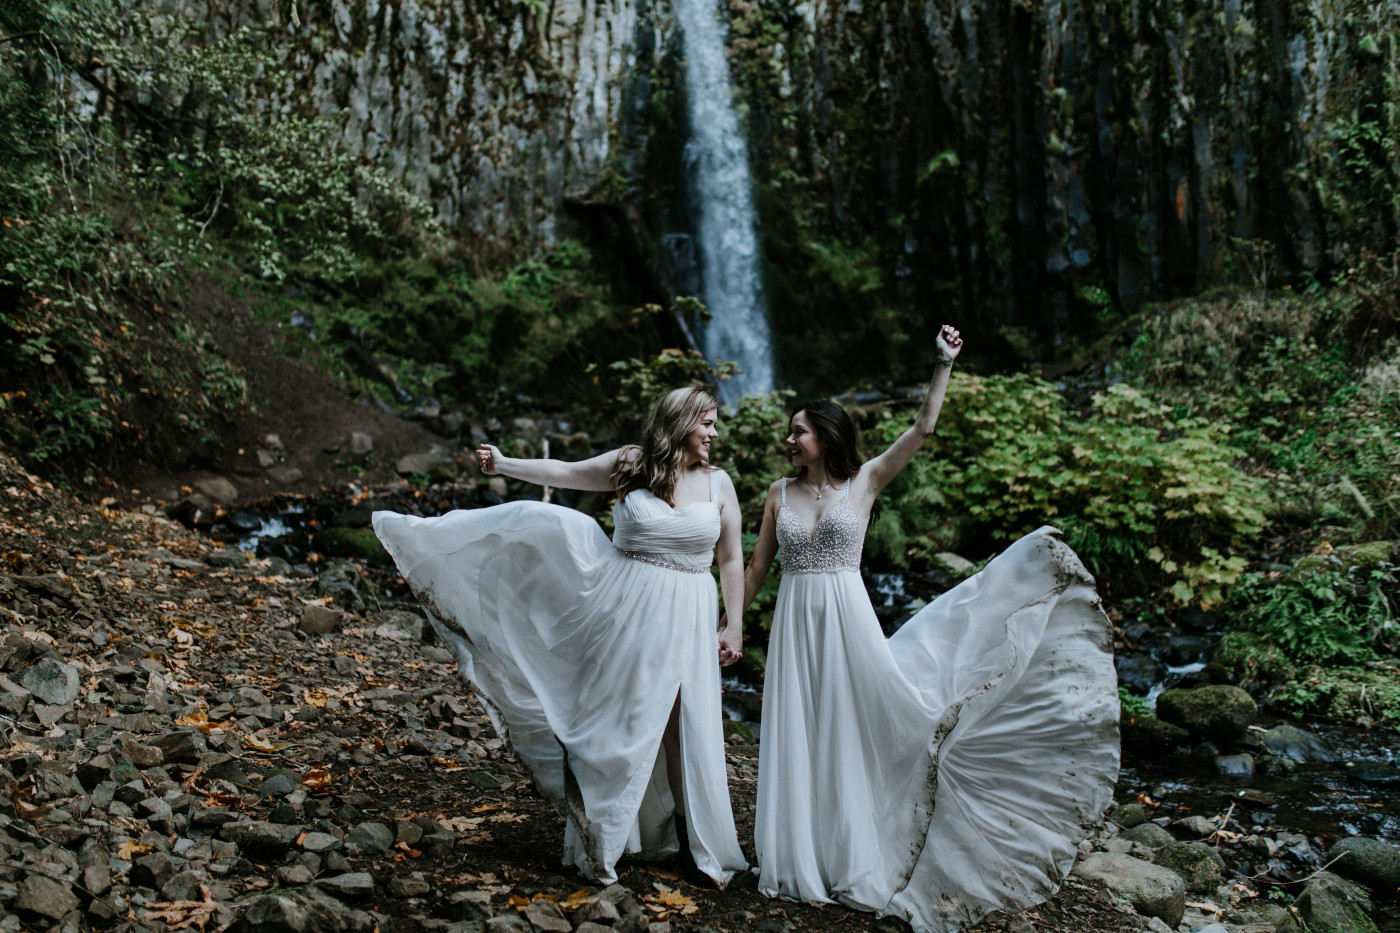 Hayley and Tiffany throw their dresses to the side. Elopement photography at the Columbia River Gorge by Sienna Plus Josh.